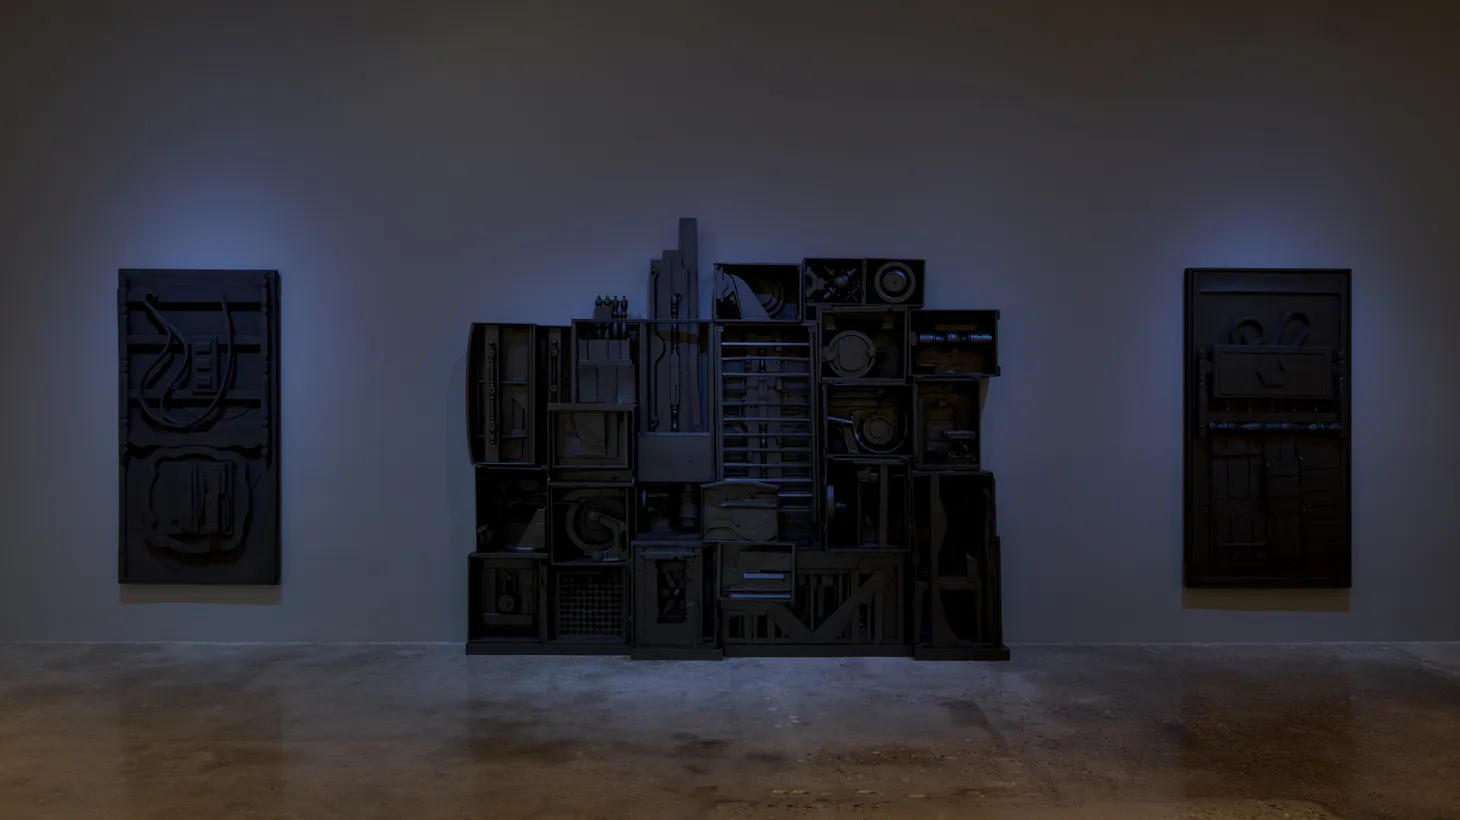 Louise Nevelson’s sculptures appear at Pace Gallery.